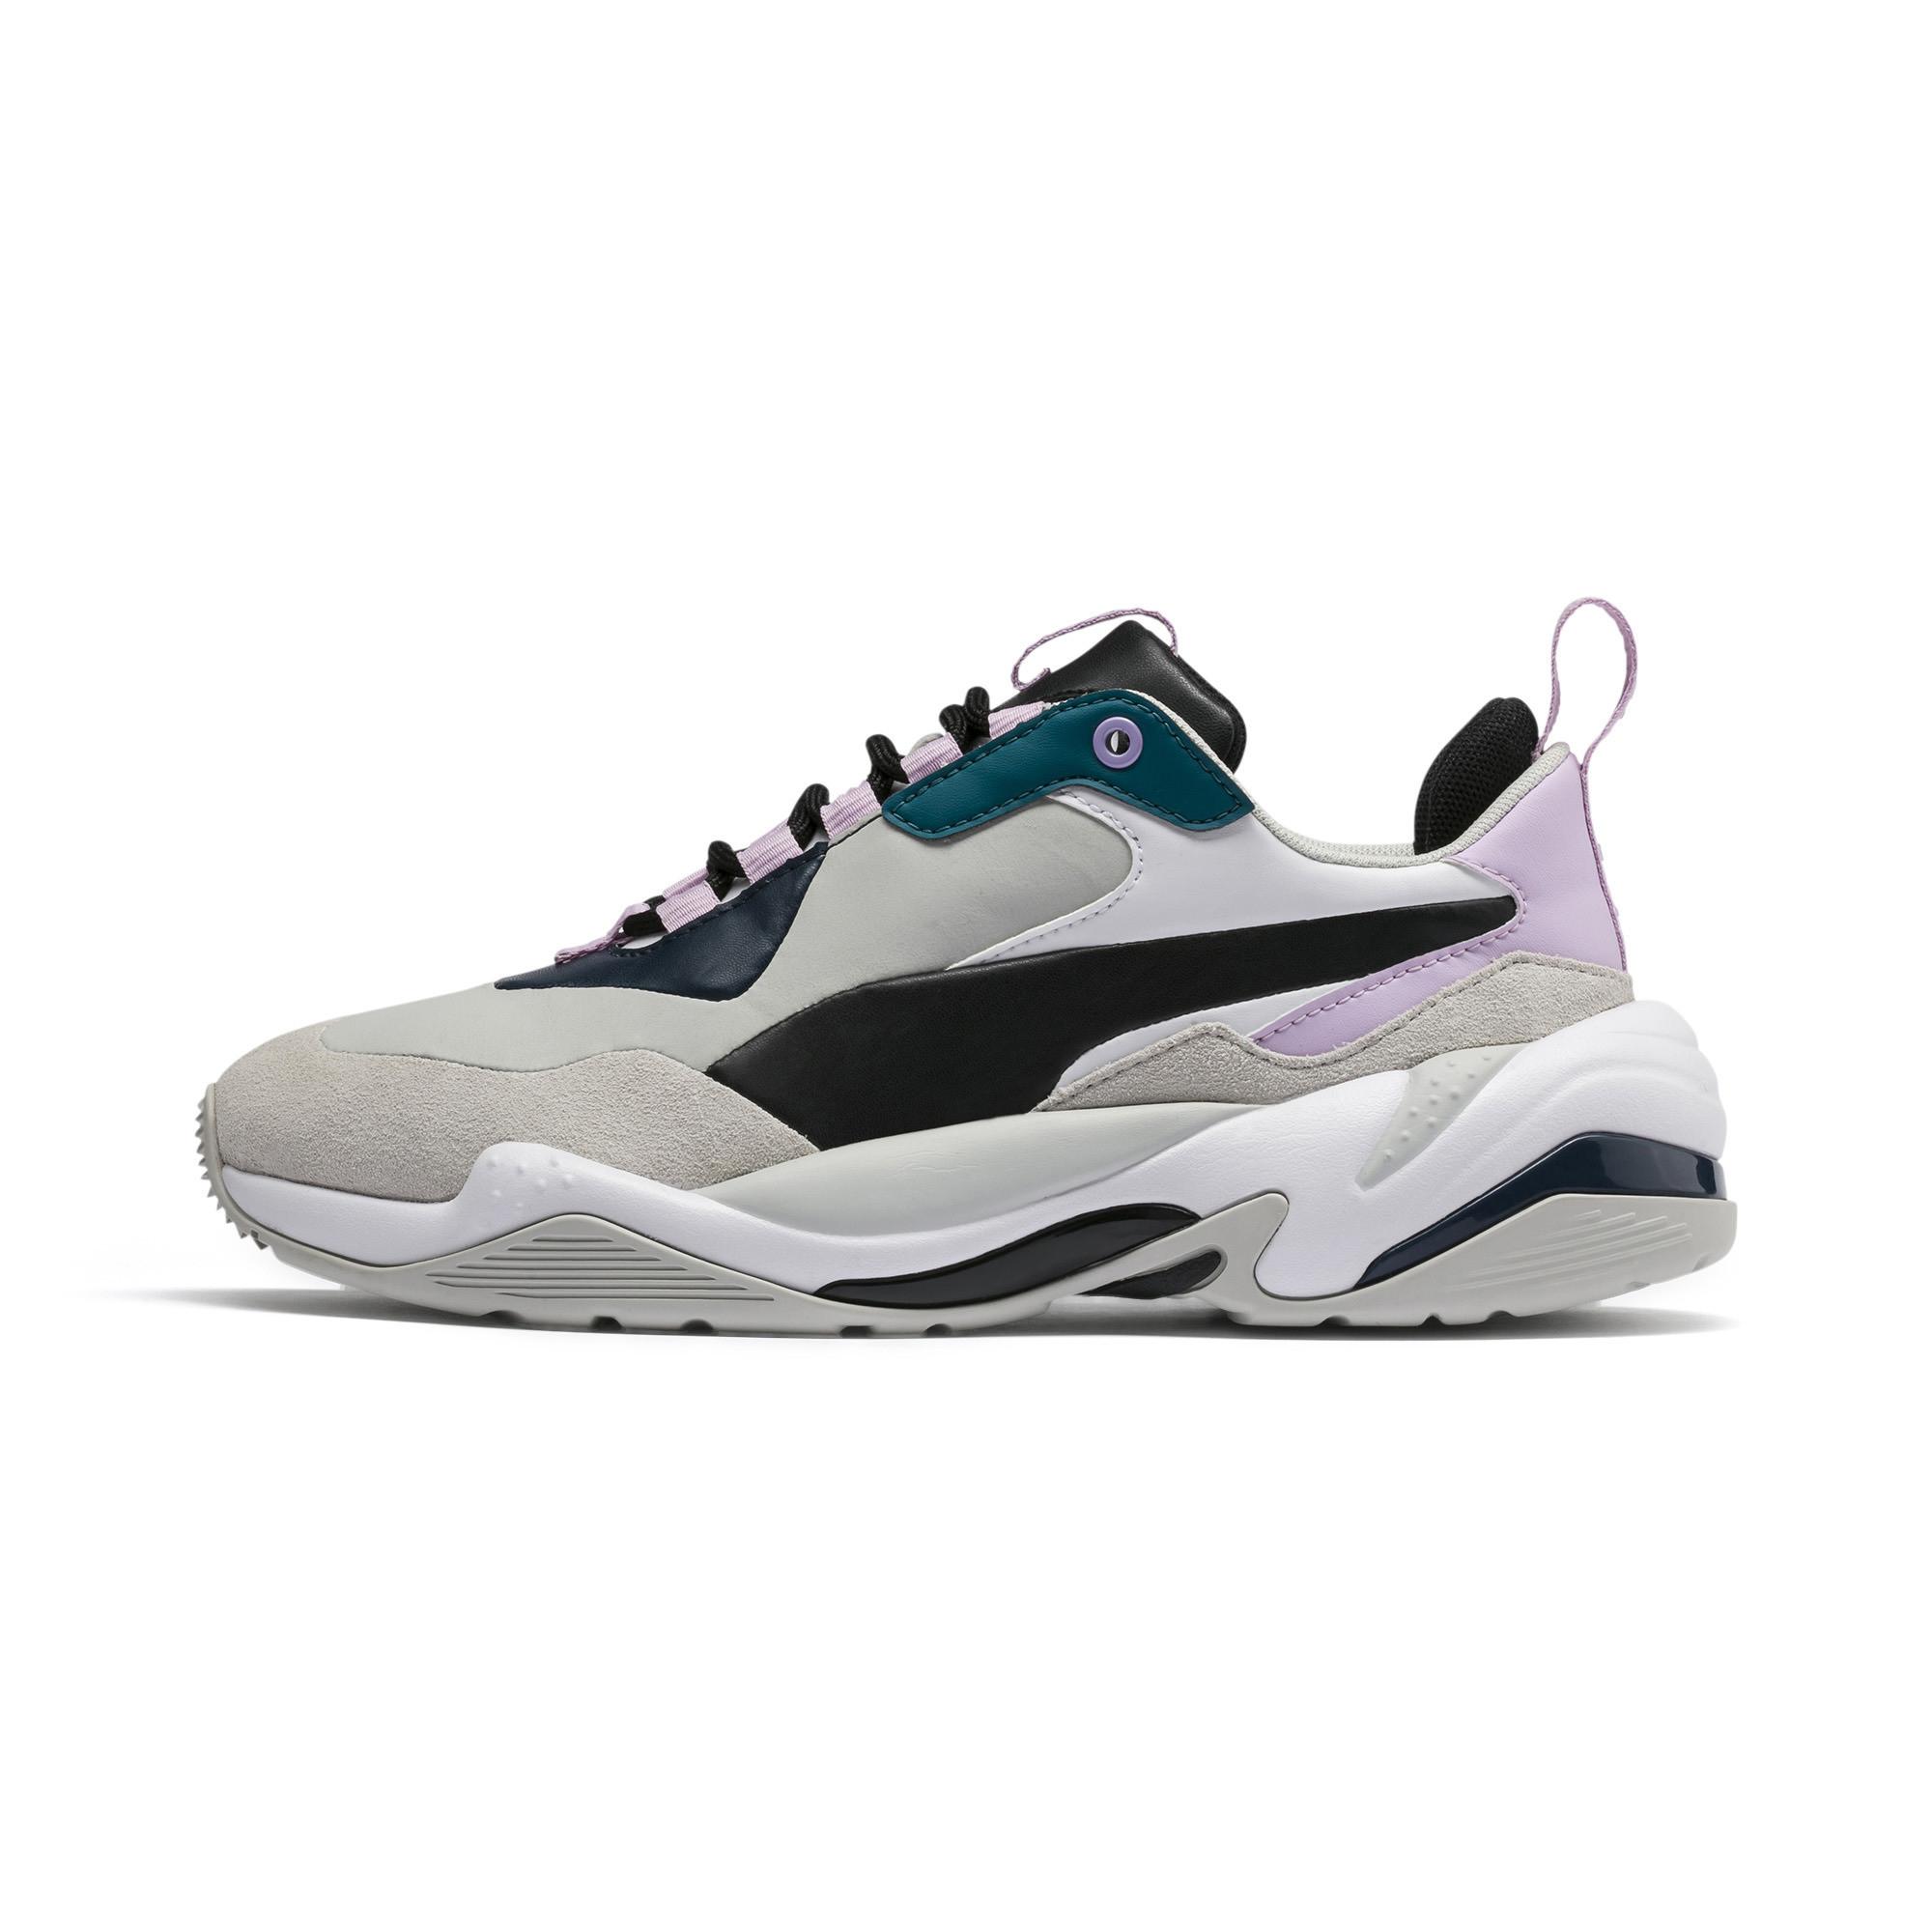 PUMA Lace Thunder Rive Droite Women's Sneakers - Lyst